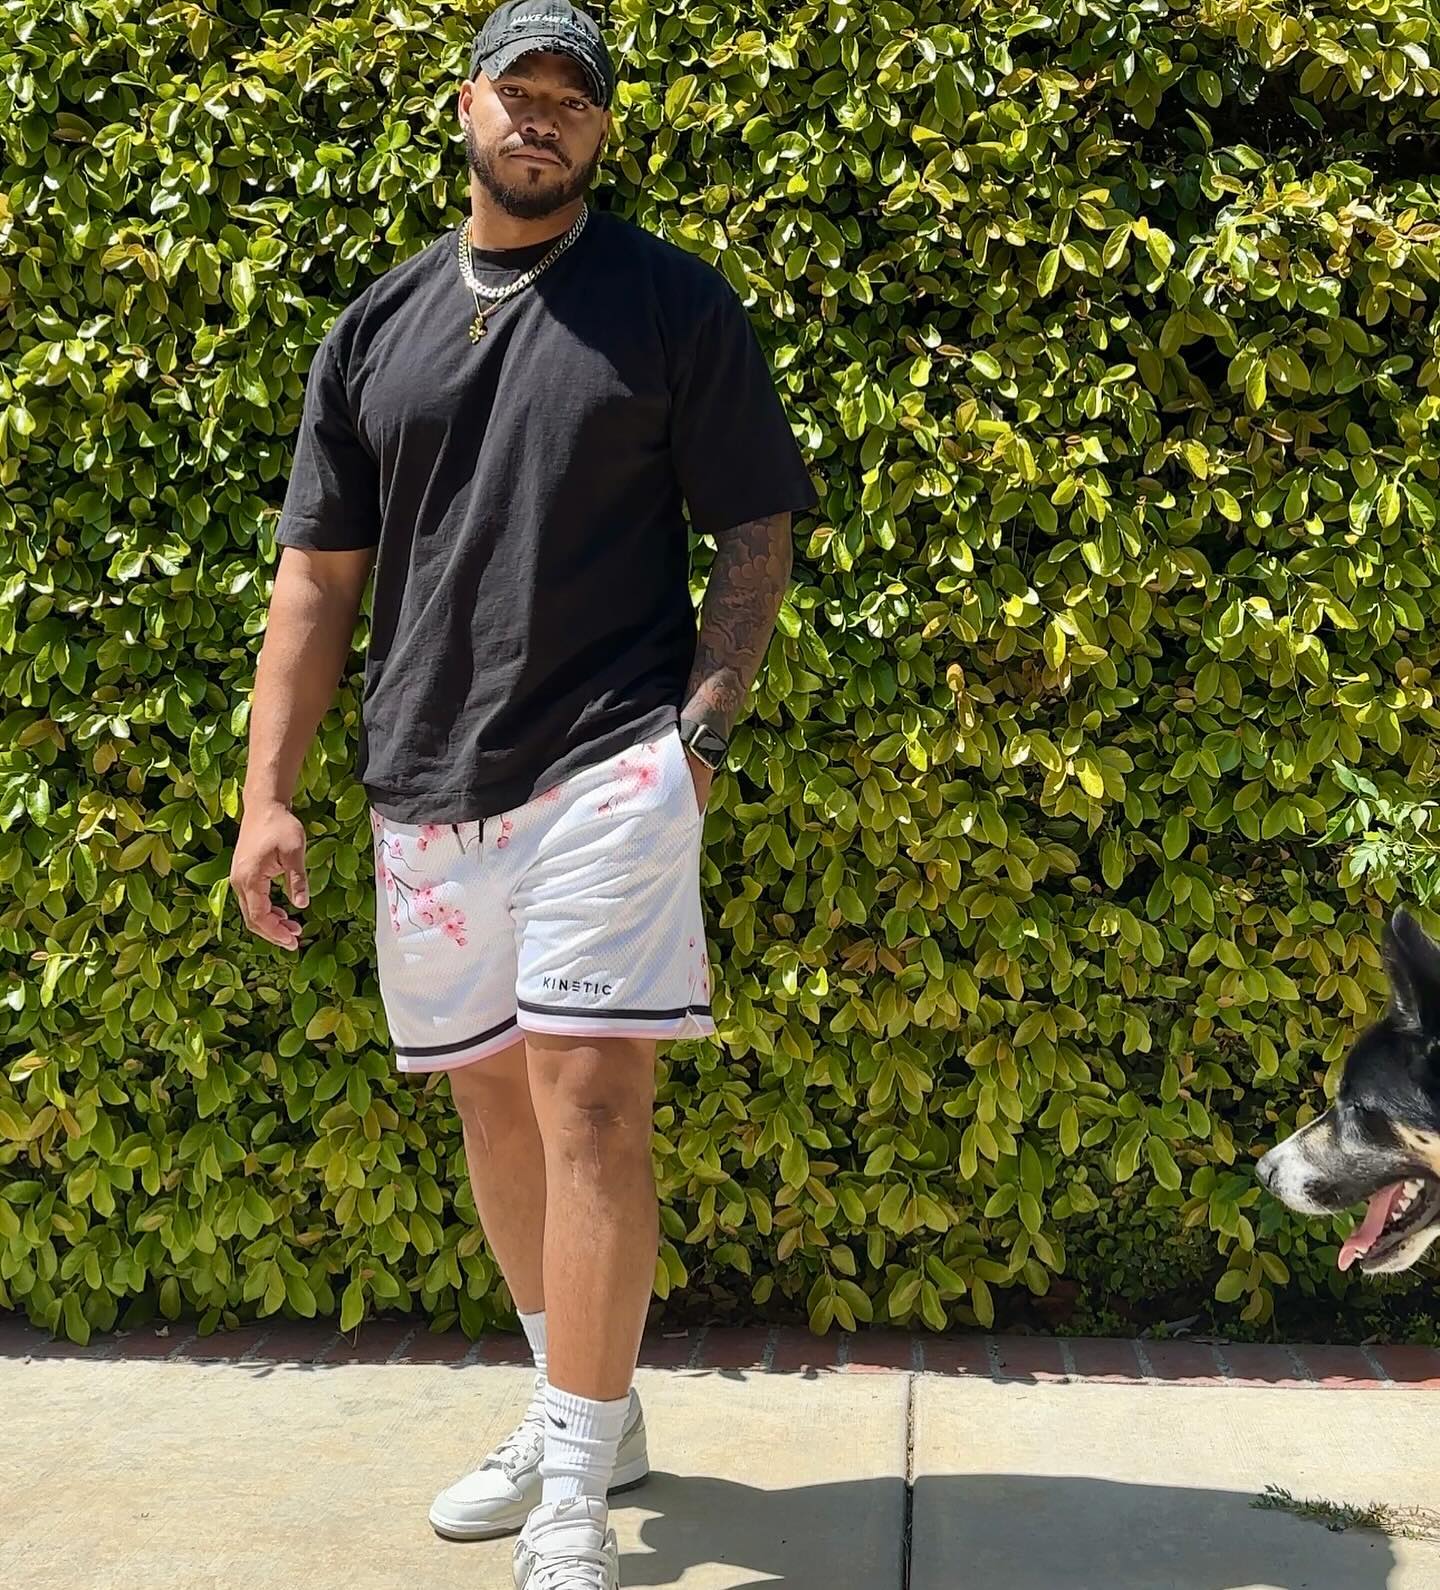 Someone decided to photobomb my photoshoot today 😂🐶
Finally getting some sun out 🙌🏽 Hope everyone has a great weekend!

S/o @kinetickings for the 🔥shorts!

Use code BURNS for discount 💯
•
•
•
#kinetickings #BiggiePawz #fashion #mensfashion #lafashion #models #lamodels #modeling #personaltrainer #fitness #lifestyle #mindset #consistency #positivity #positivevibes #morelife